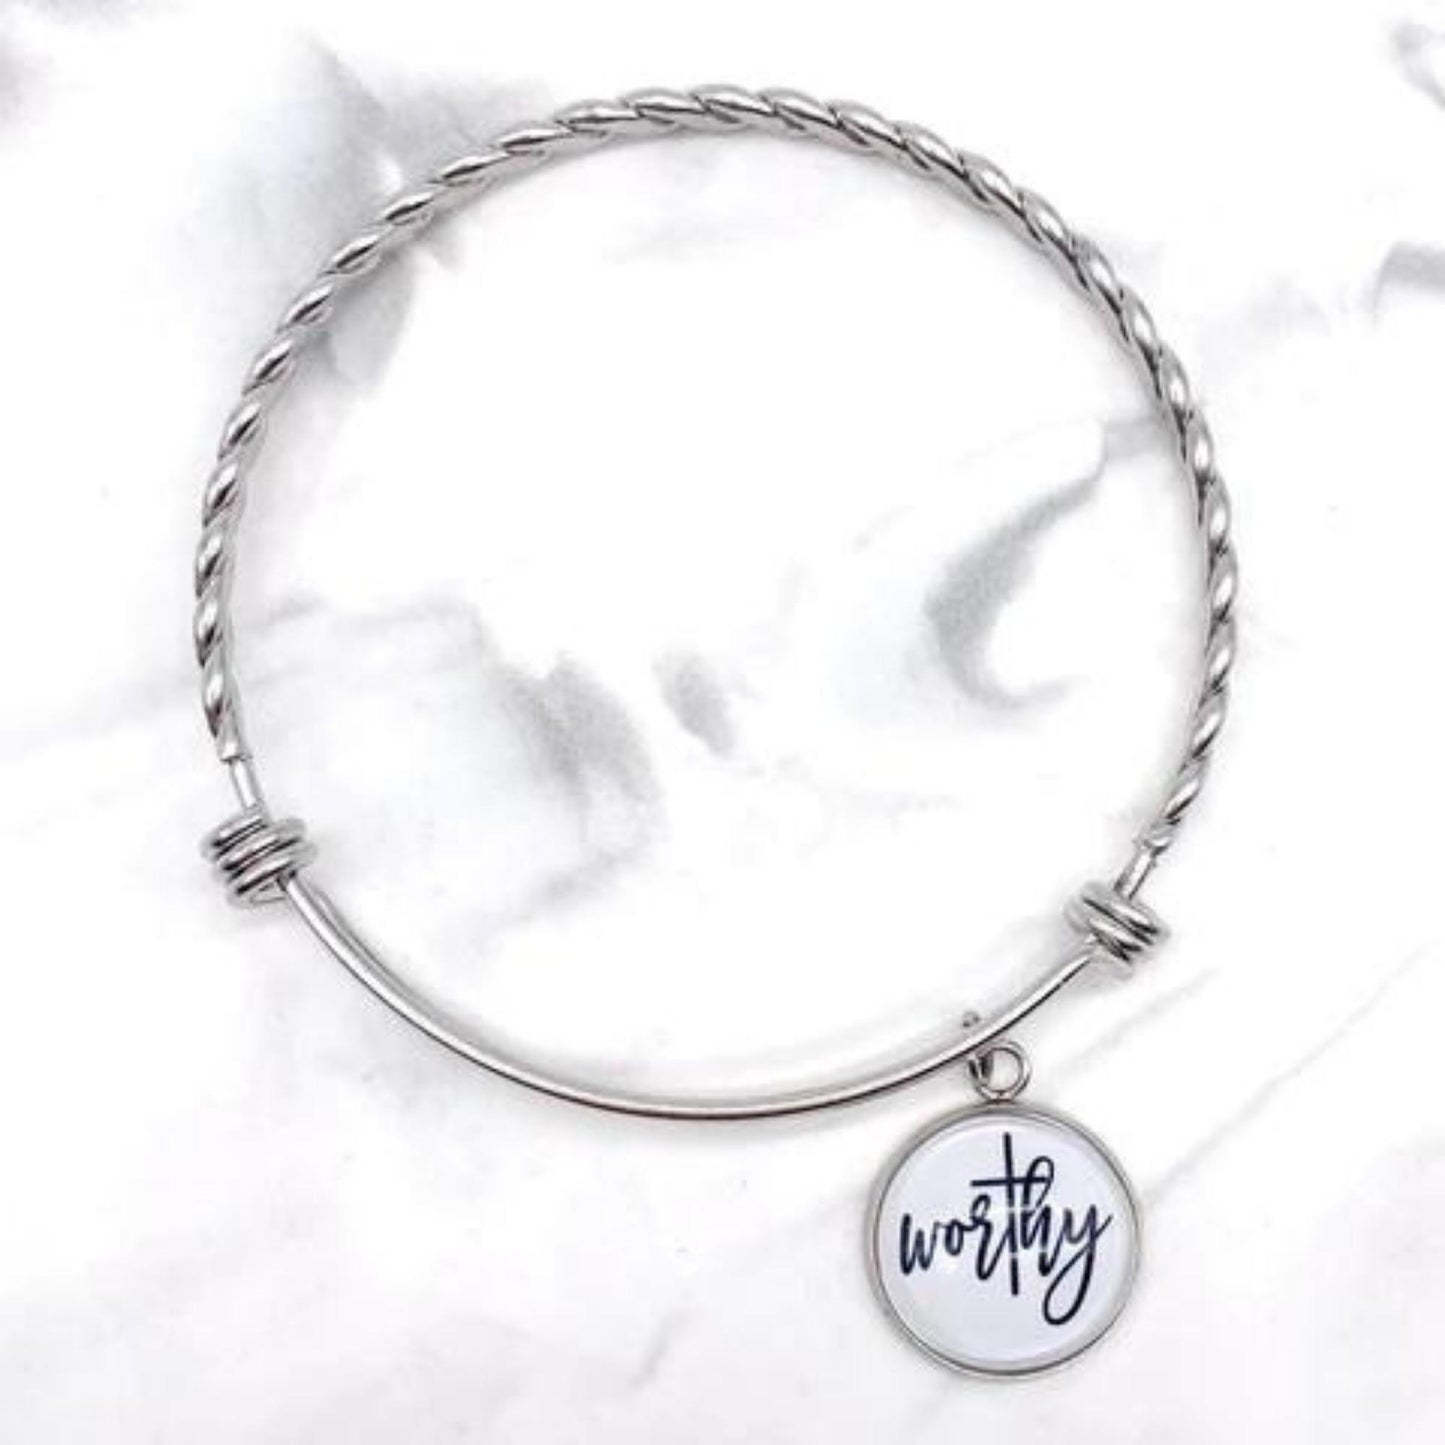 Inspirational Stainless Steel Bracelet Collection - Choose from Worthy or Be the Light | worthy stainless steel Christian bracelet shown | oak7west.com